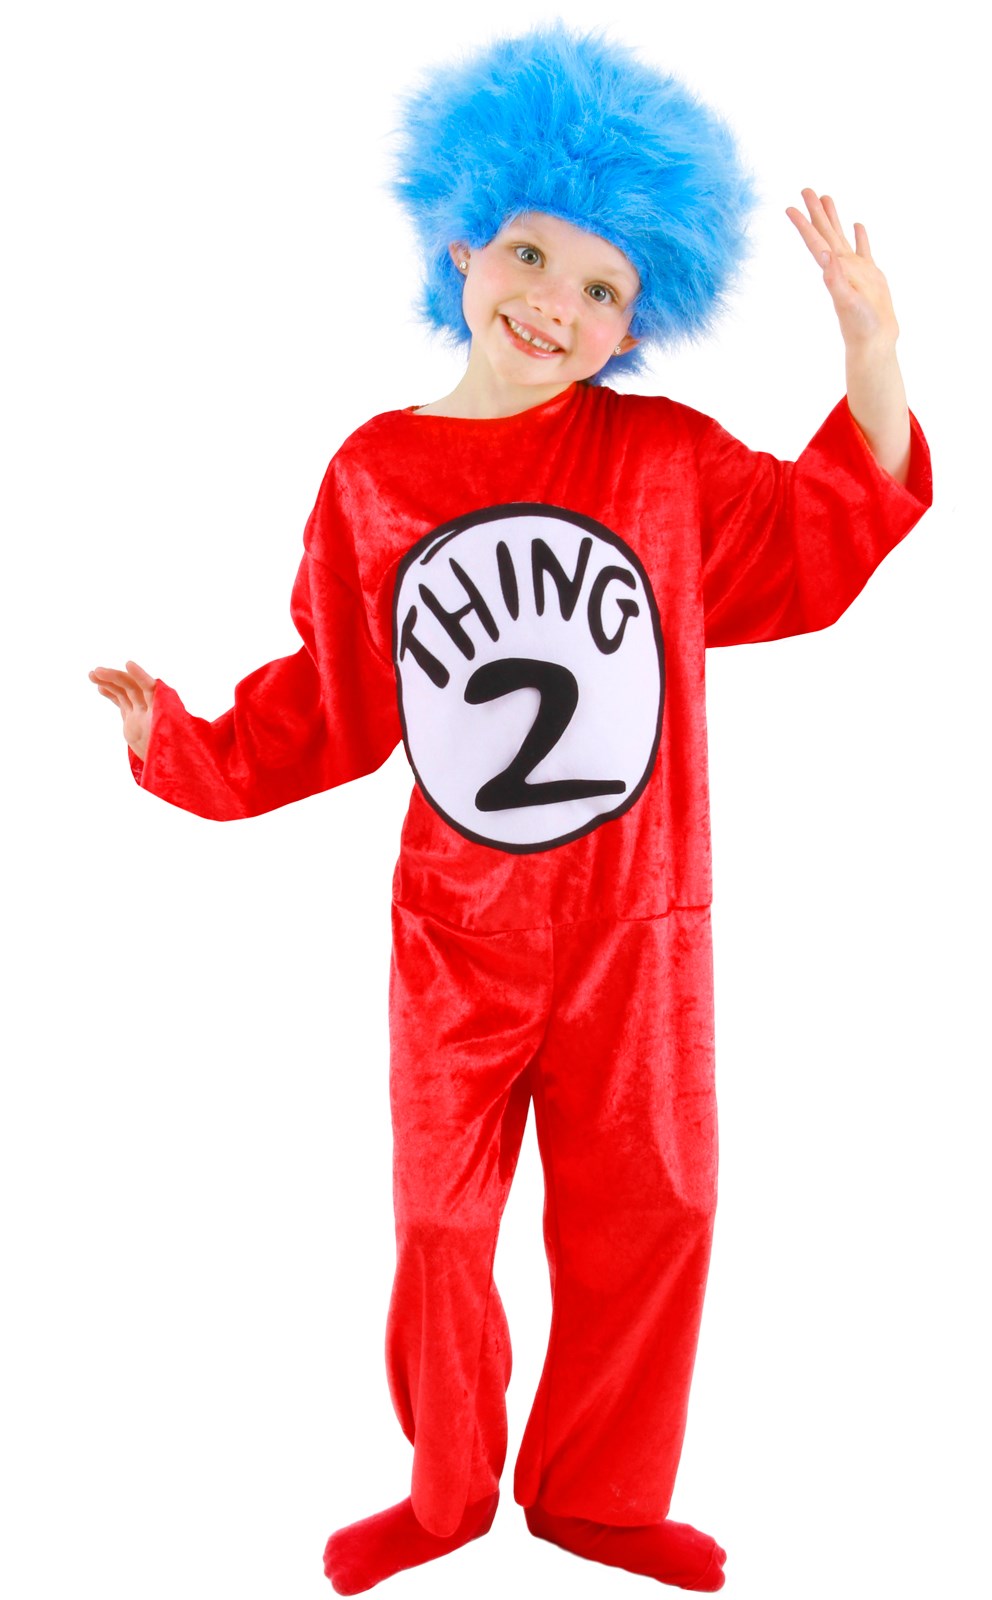 Dr. Seuss - Thing 1 and 2 Child Costume